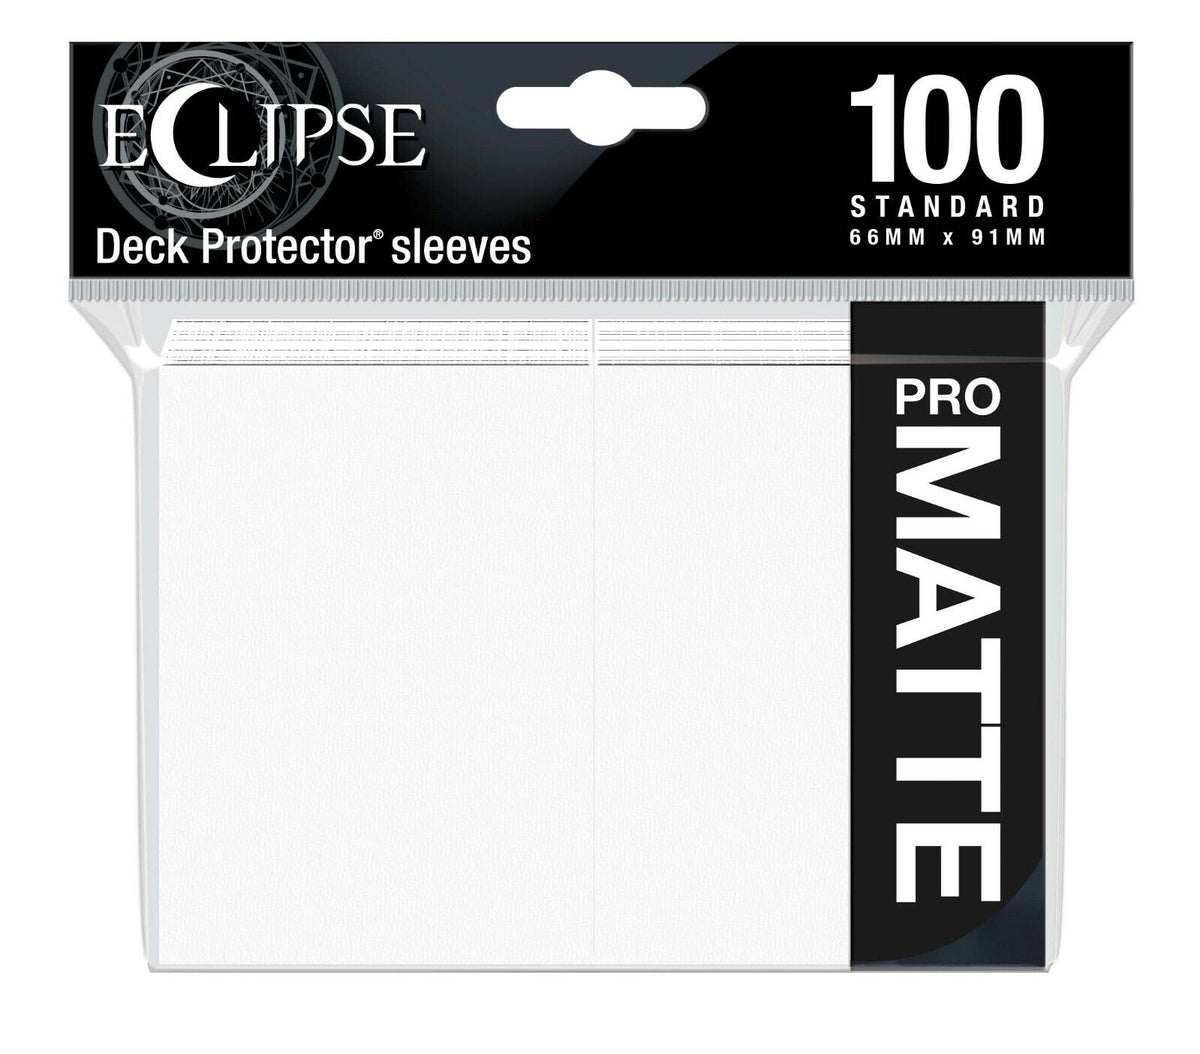 Ultra Pro Eclipse Pro Matte Deck Protector Sleeves Standard 100 ct 66m –  SPORTS ZONE TOYS & COMICS